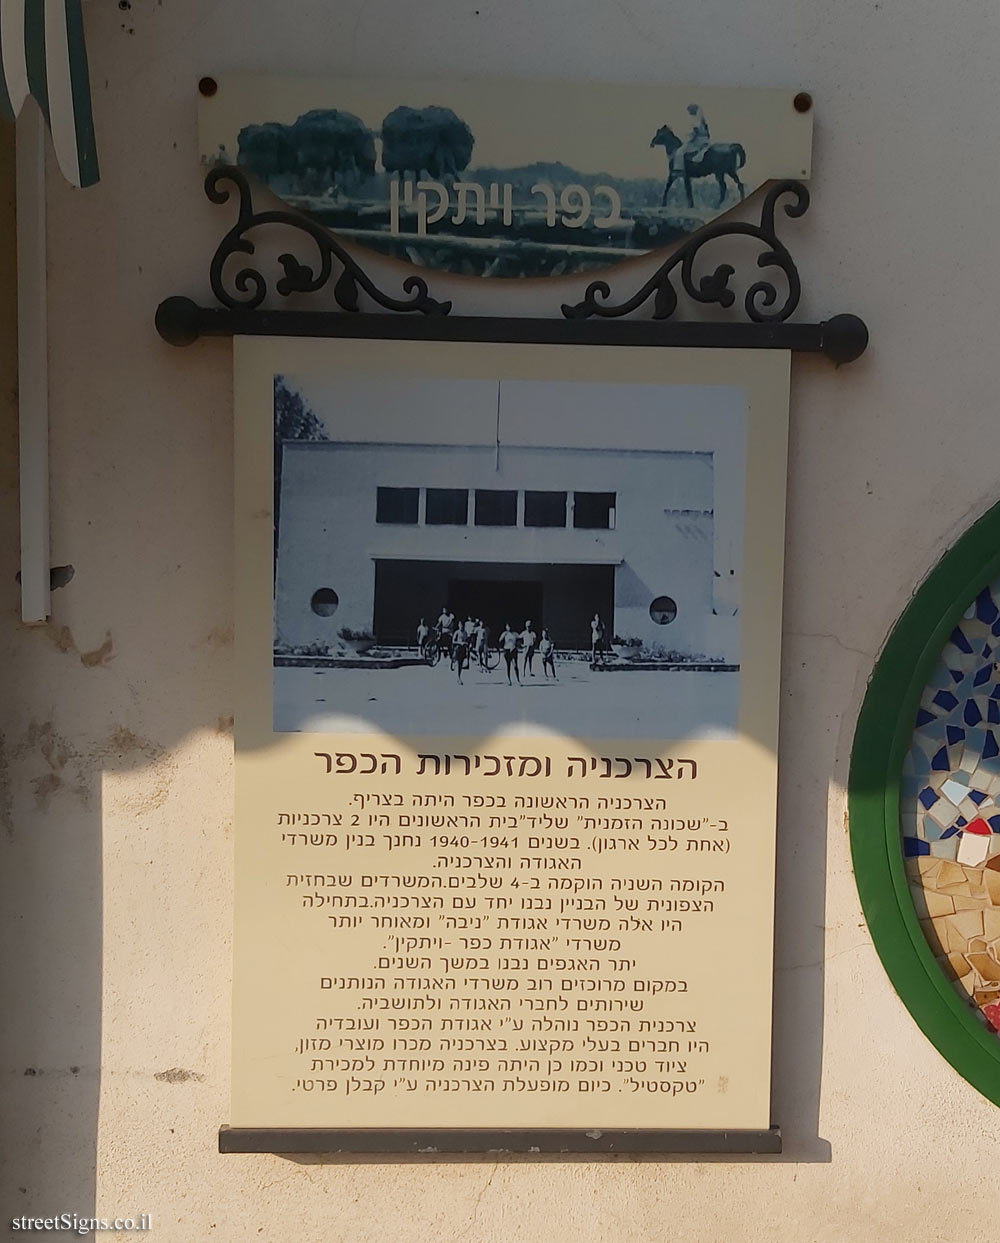 Kfar Vitkin - the grocery store and the village secretariat